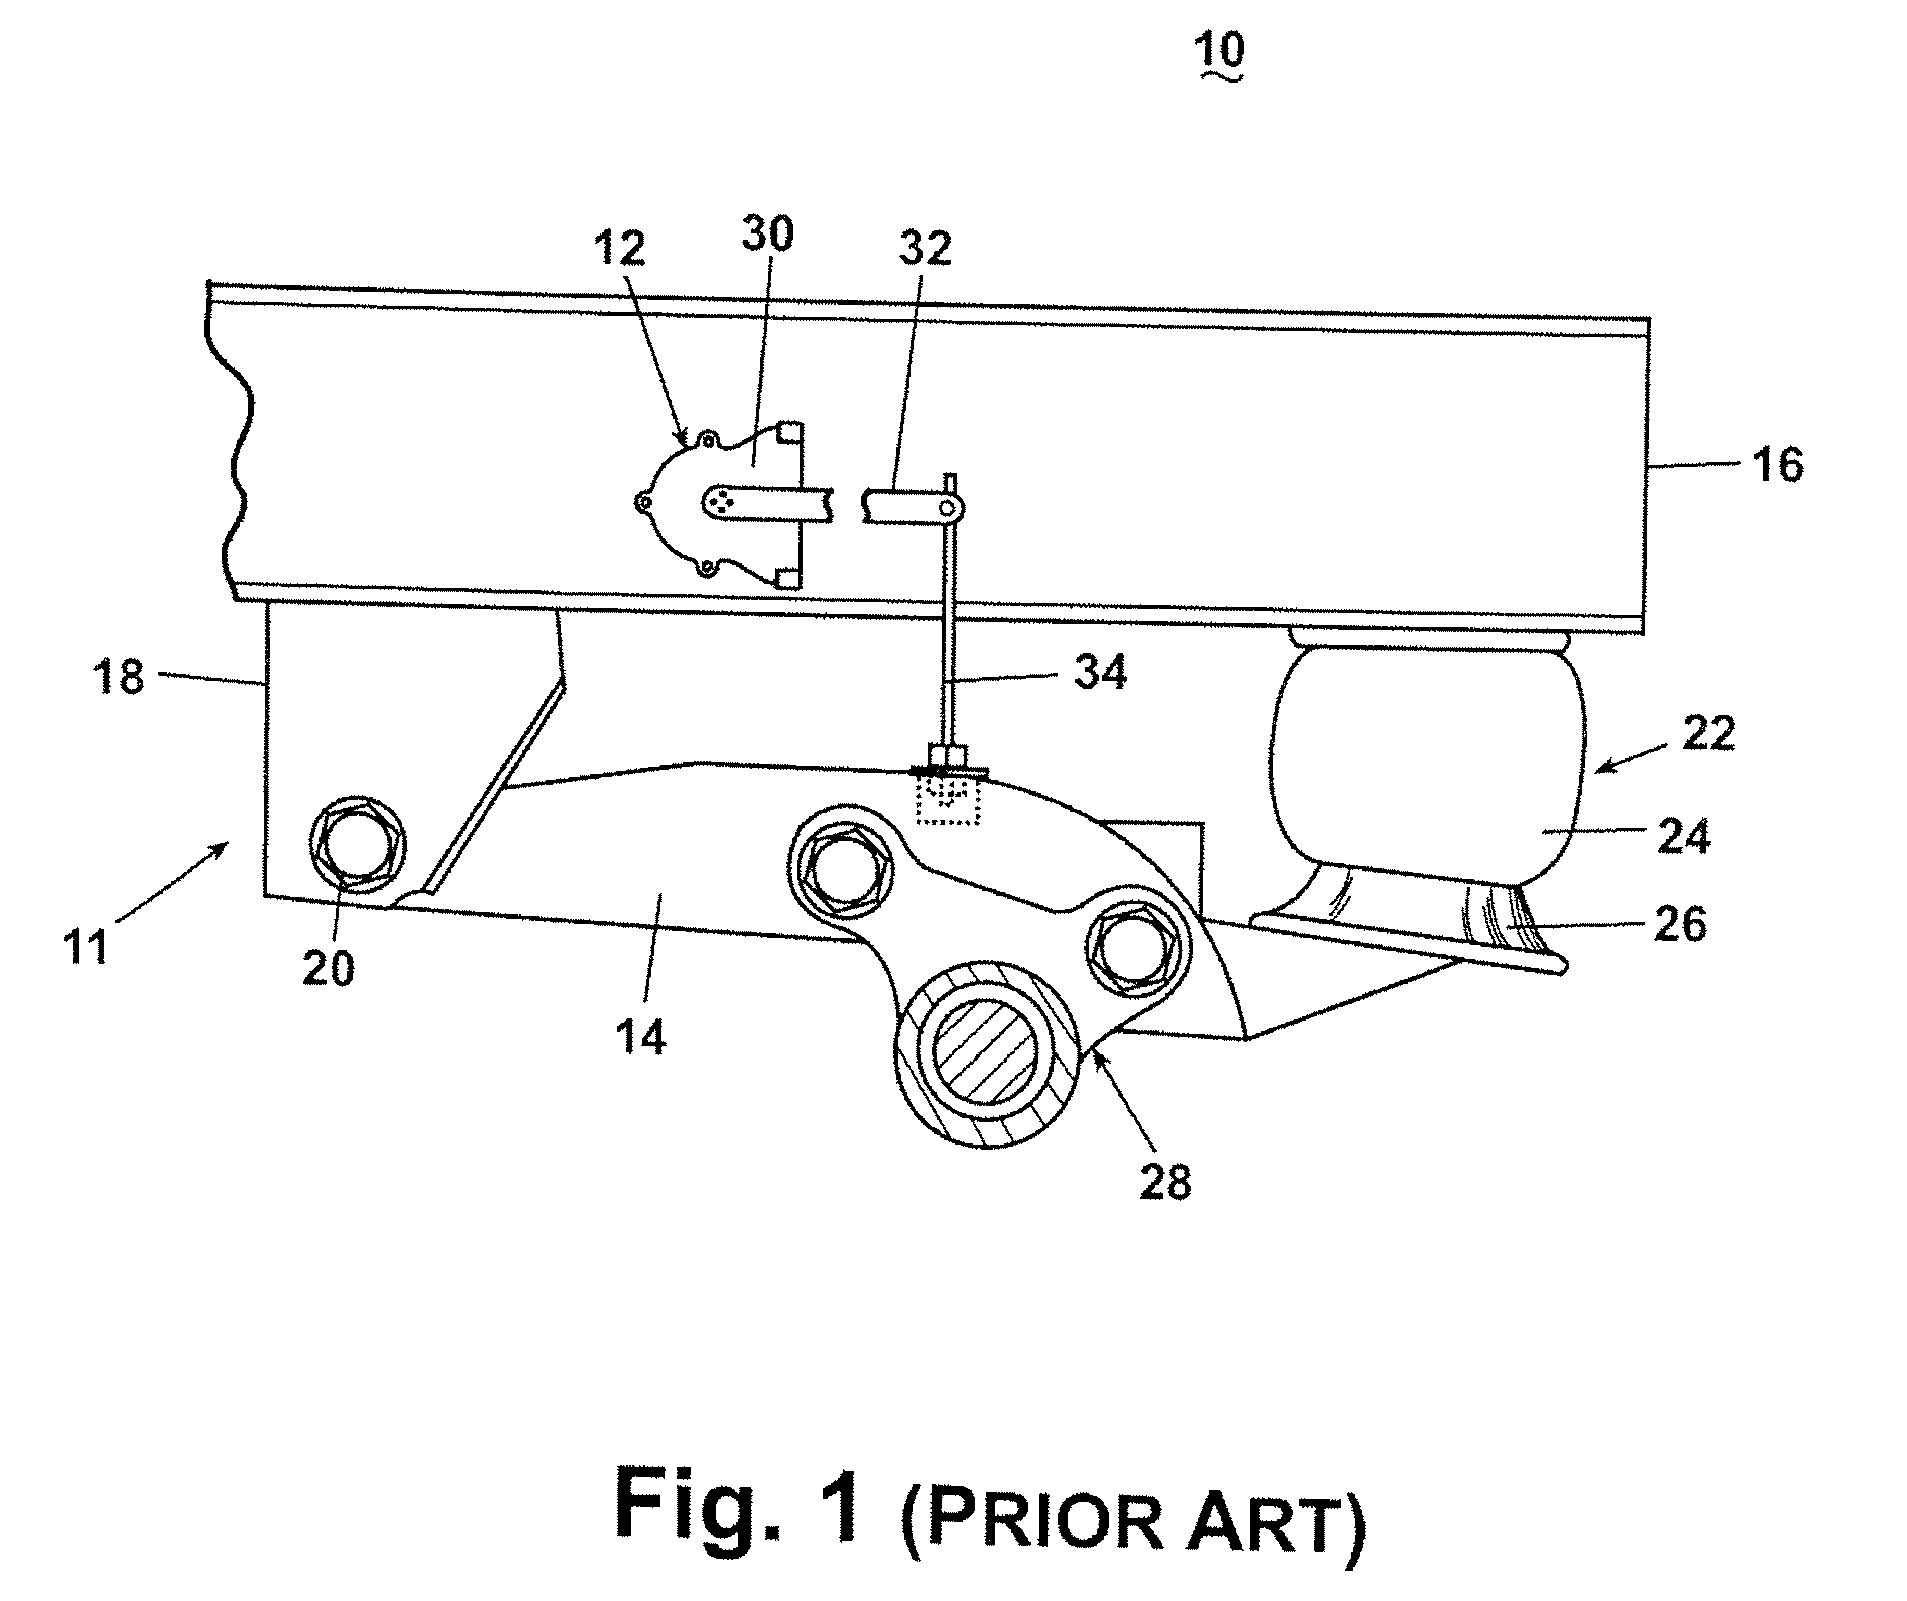 Trailing arm suspension and height control system with motorized valve therefor